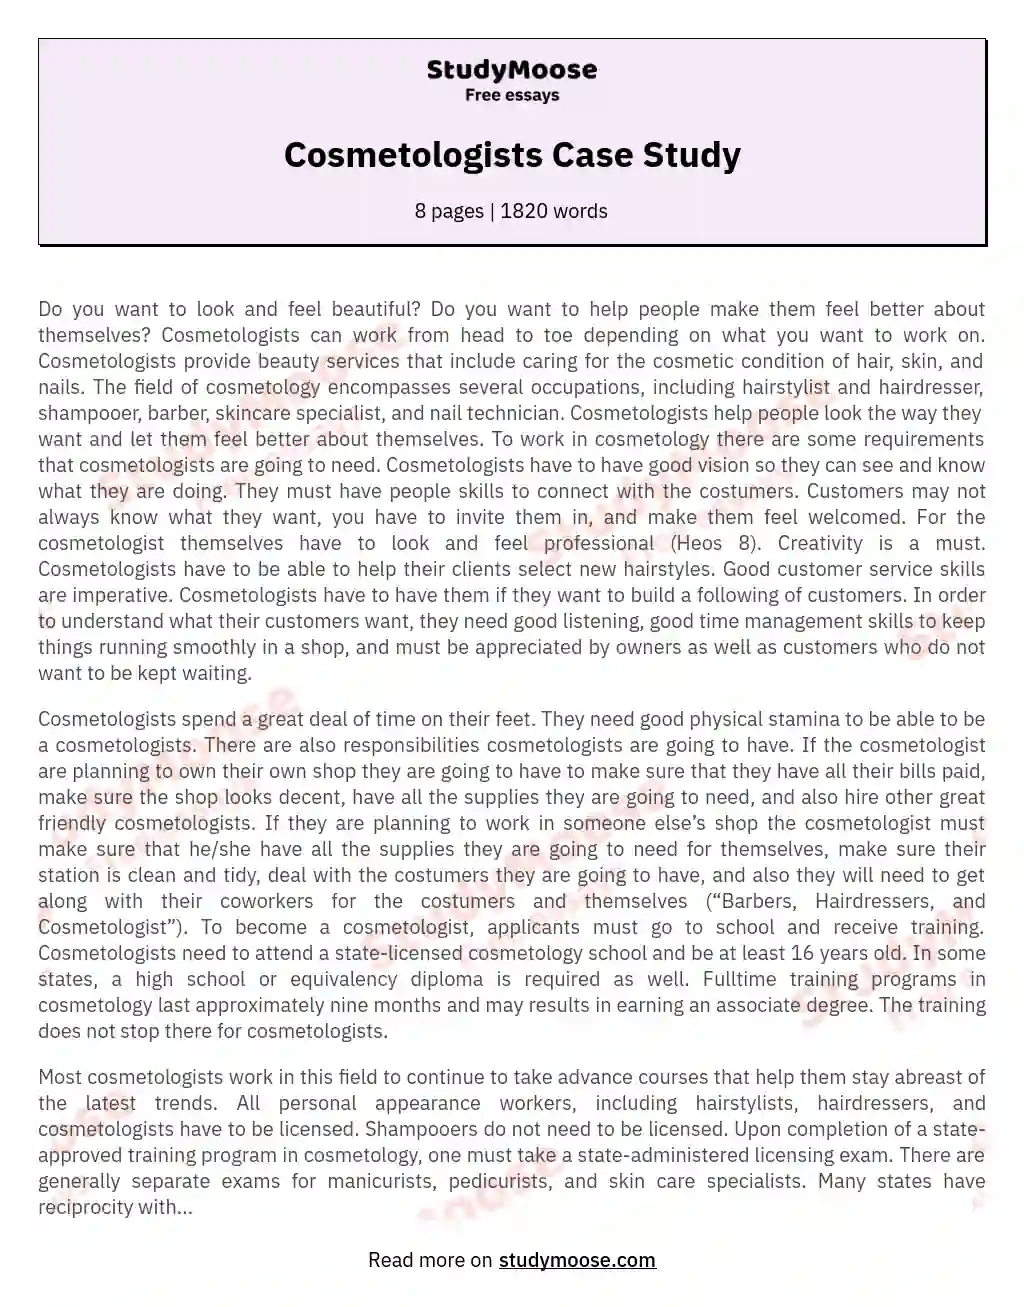 Cosmetologists Case Study